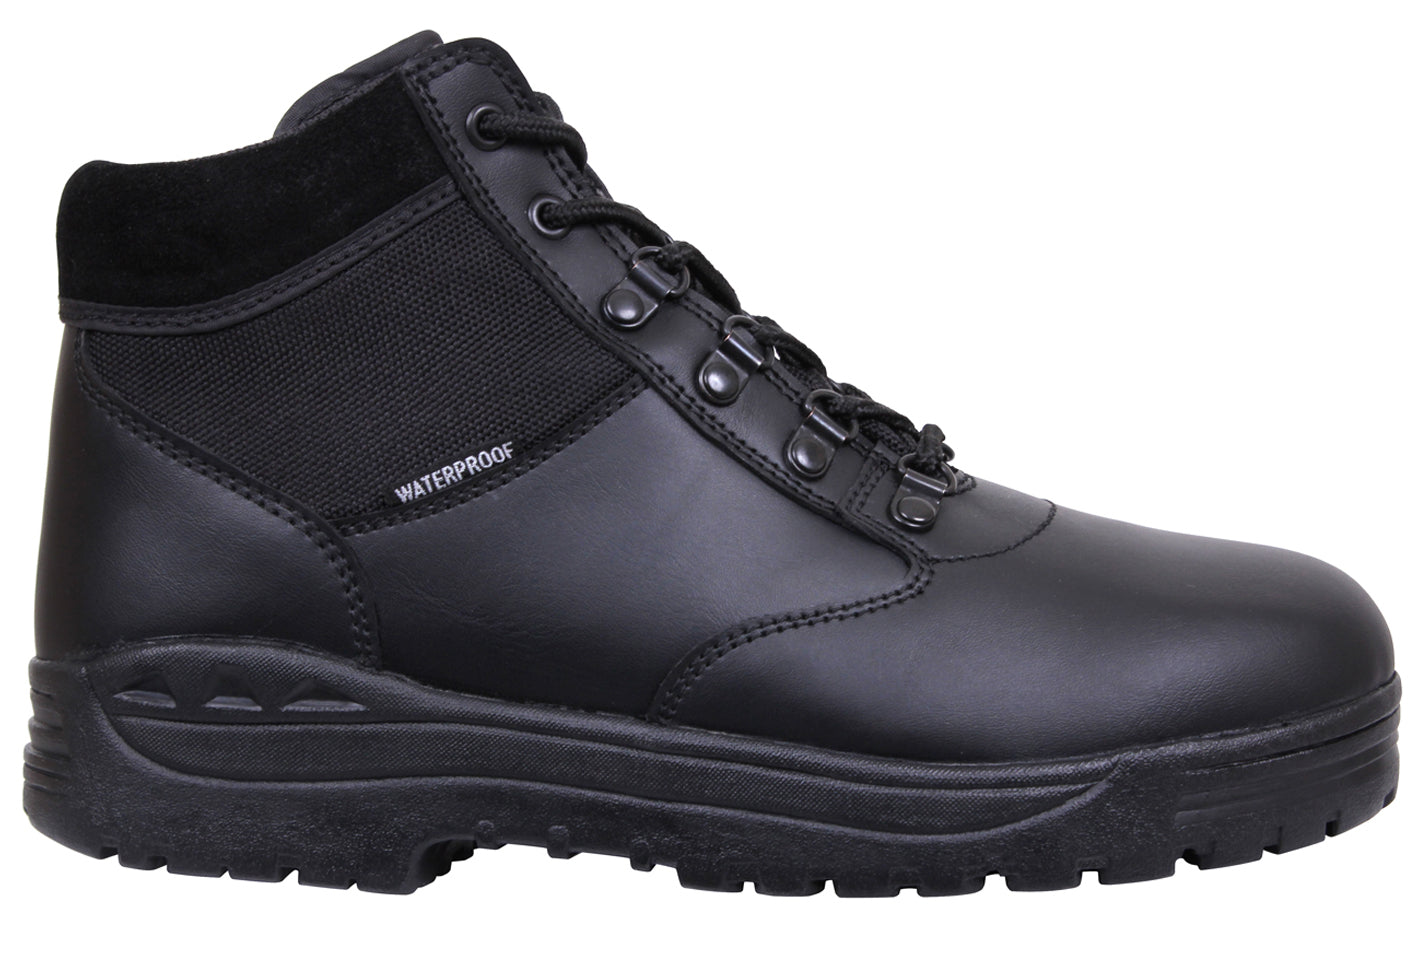 Mens Black GI Style Forced Entry Waterproof Tactical Boots by Rothco